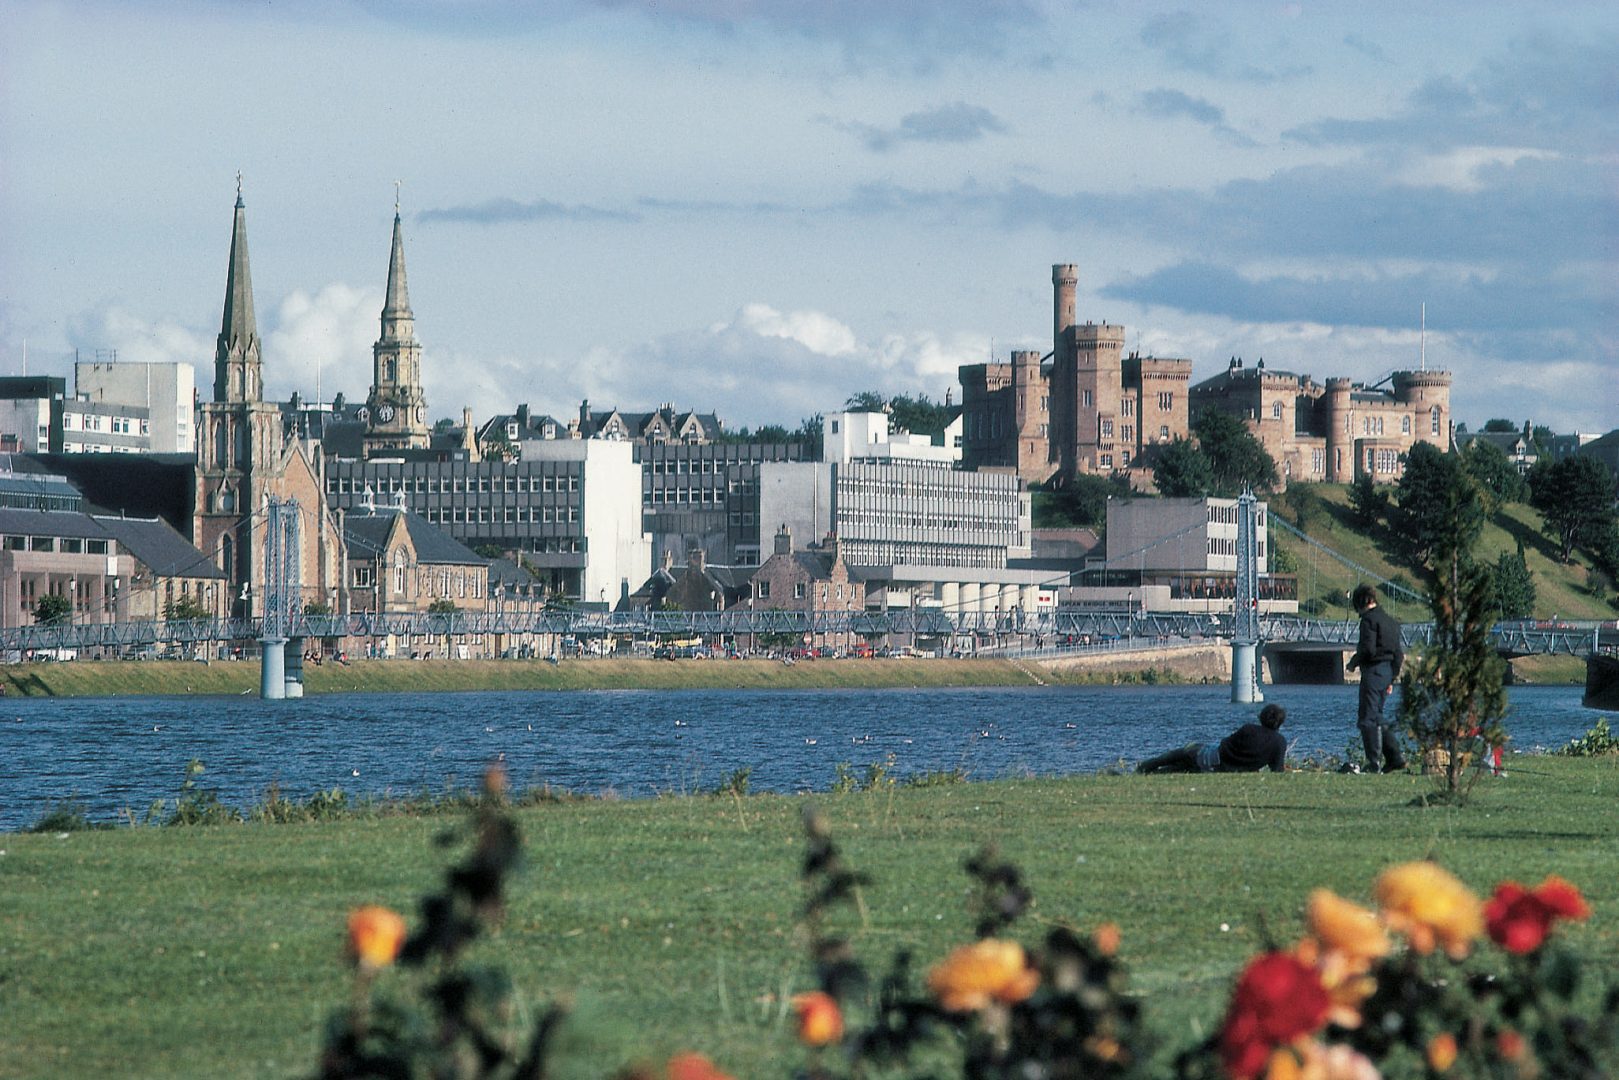 A view of Inverness from the river